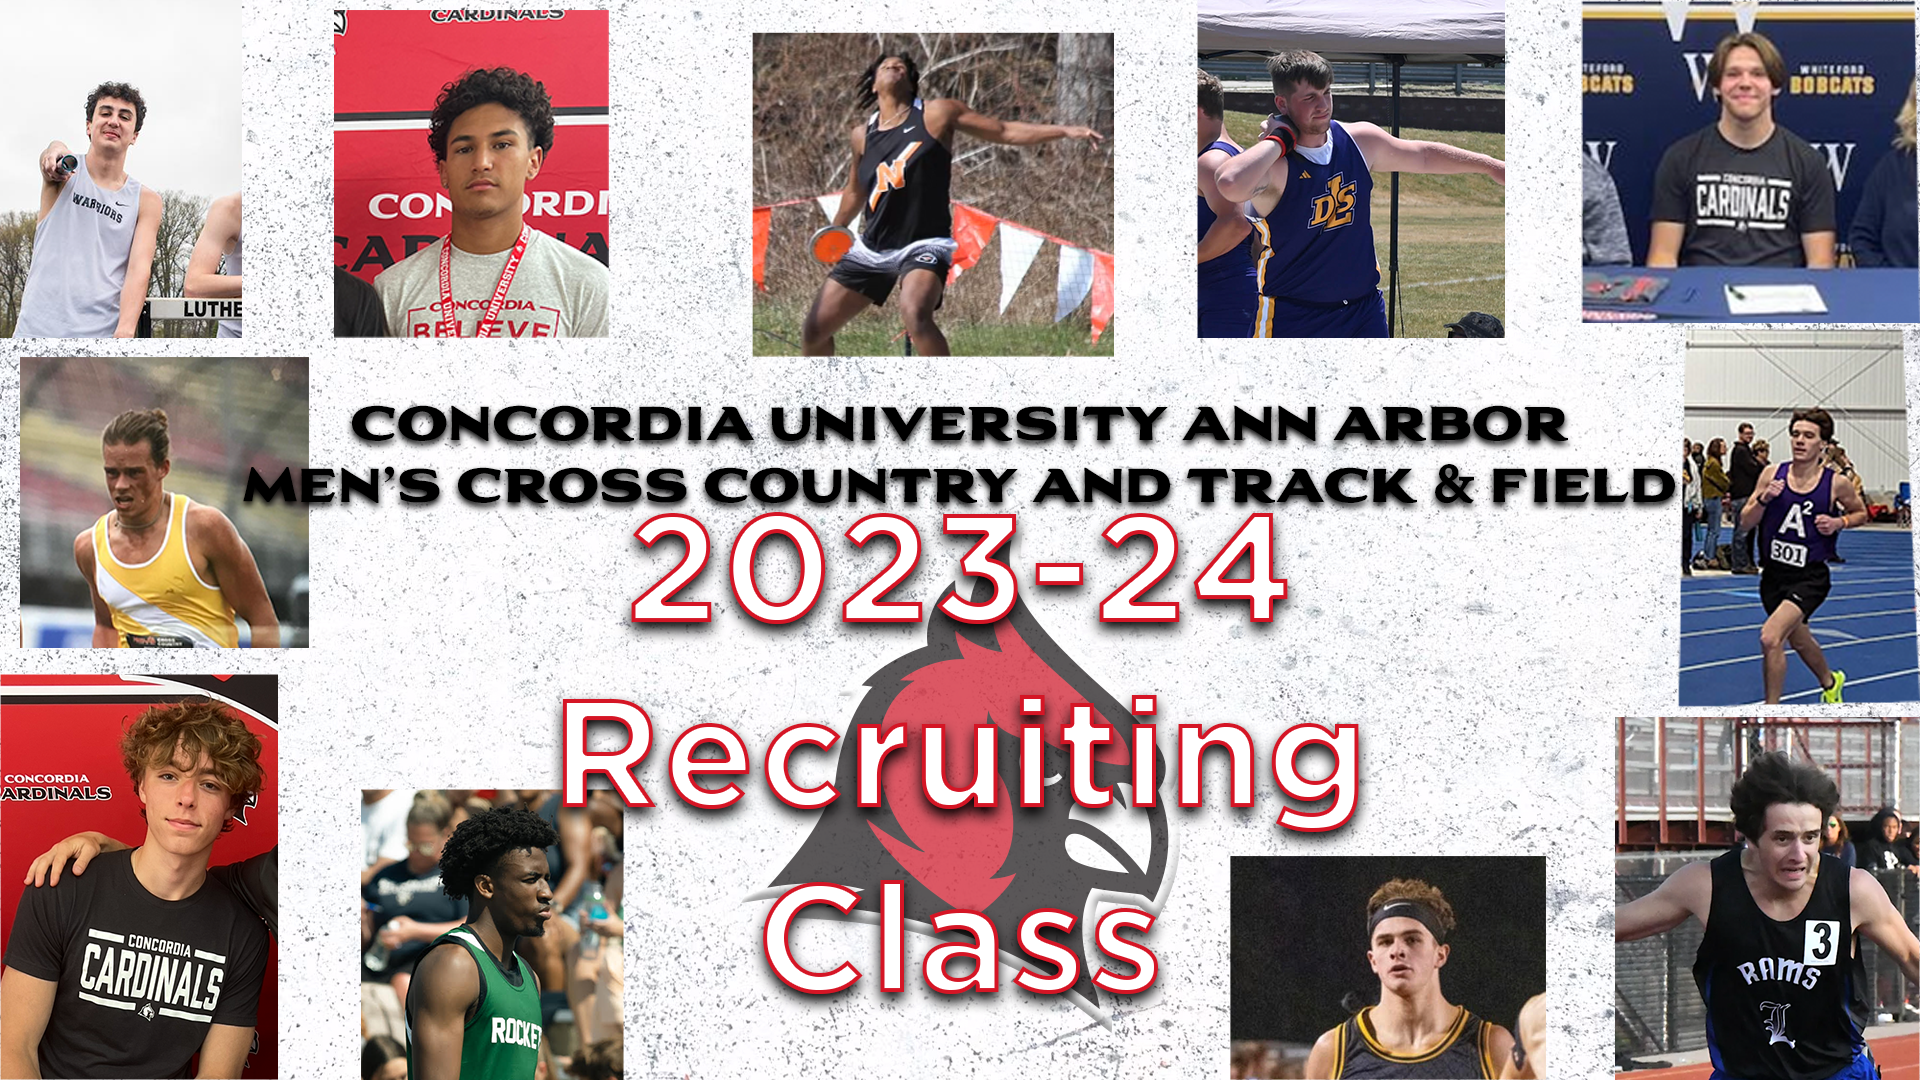 Men's Cross Country and Track & Field announce the 2023-24 Recruiting Class